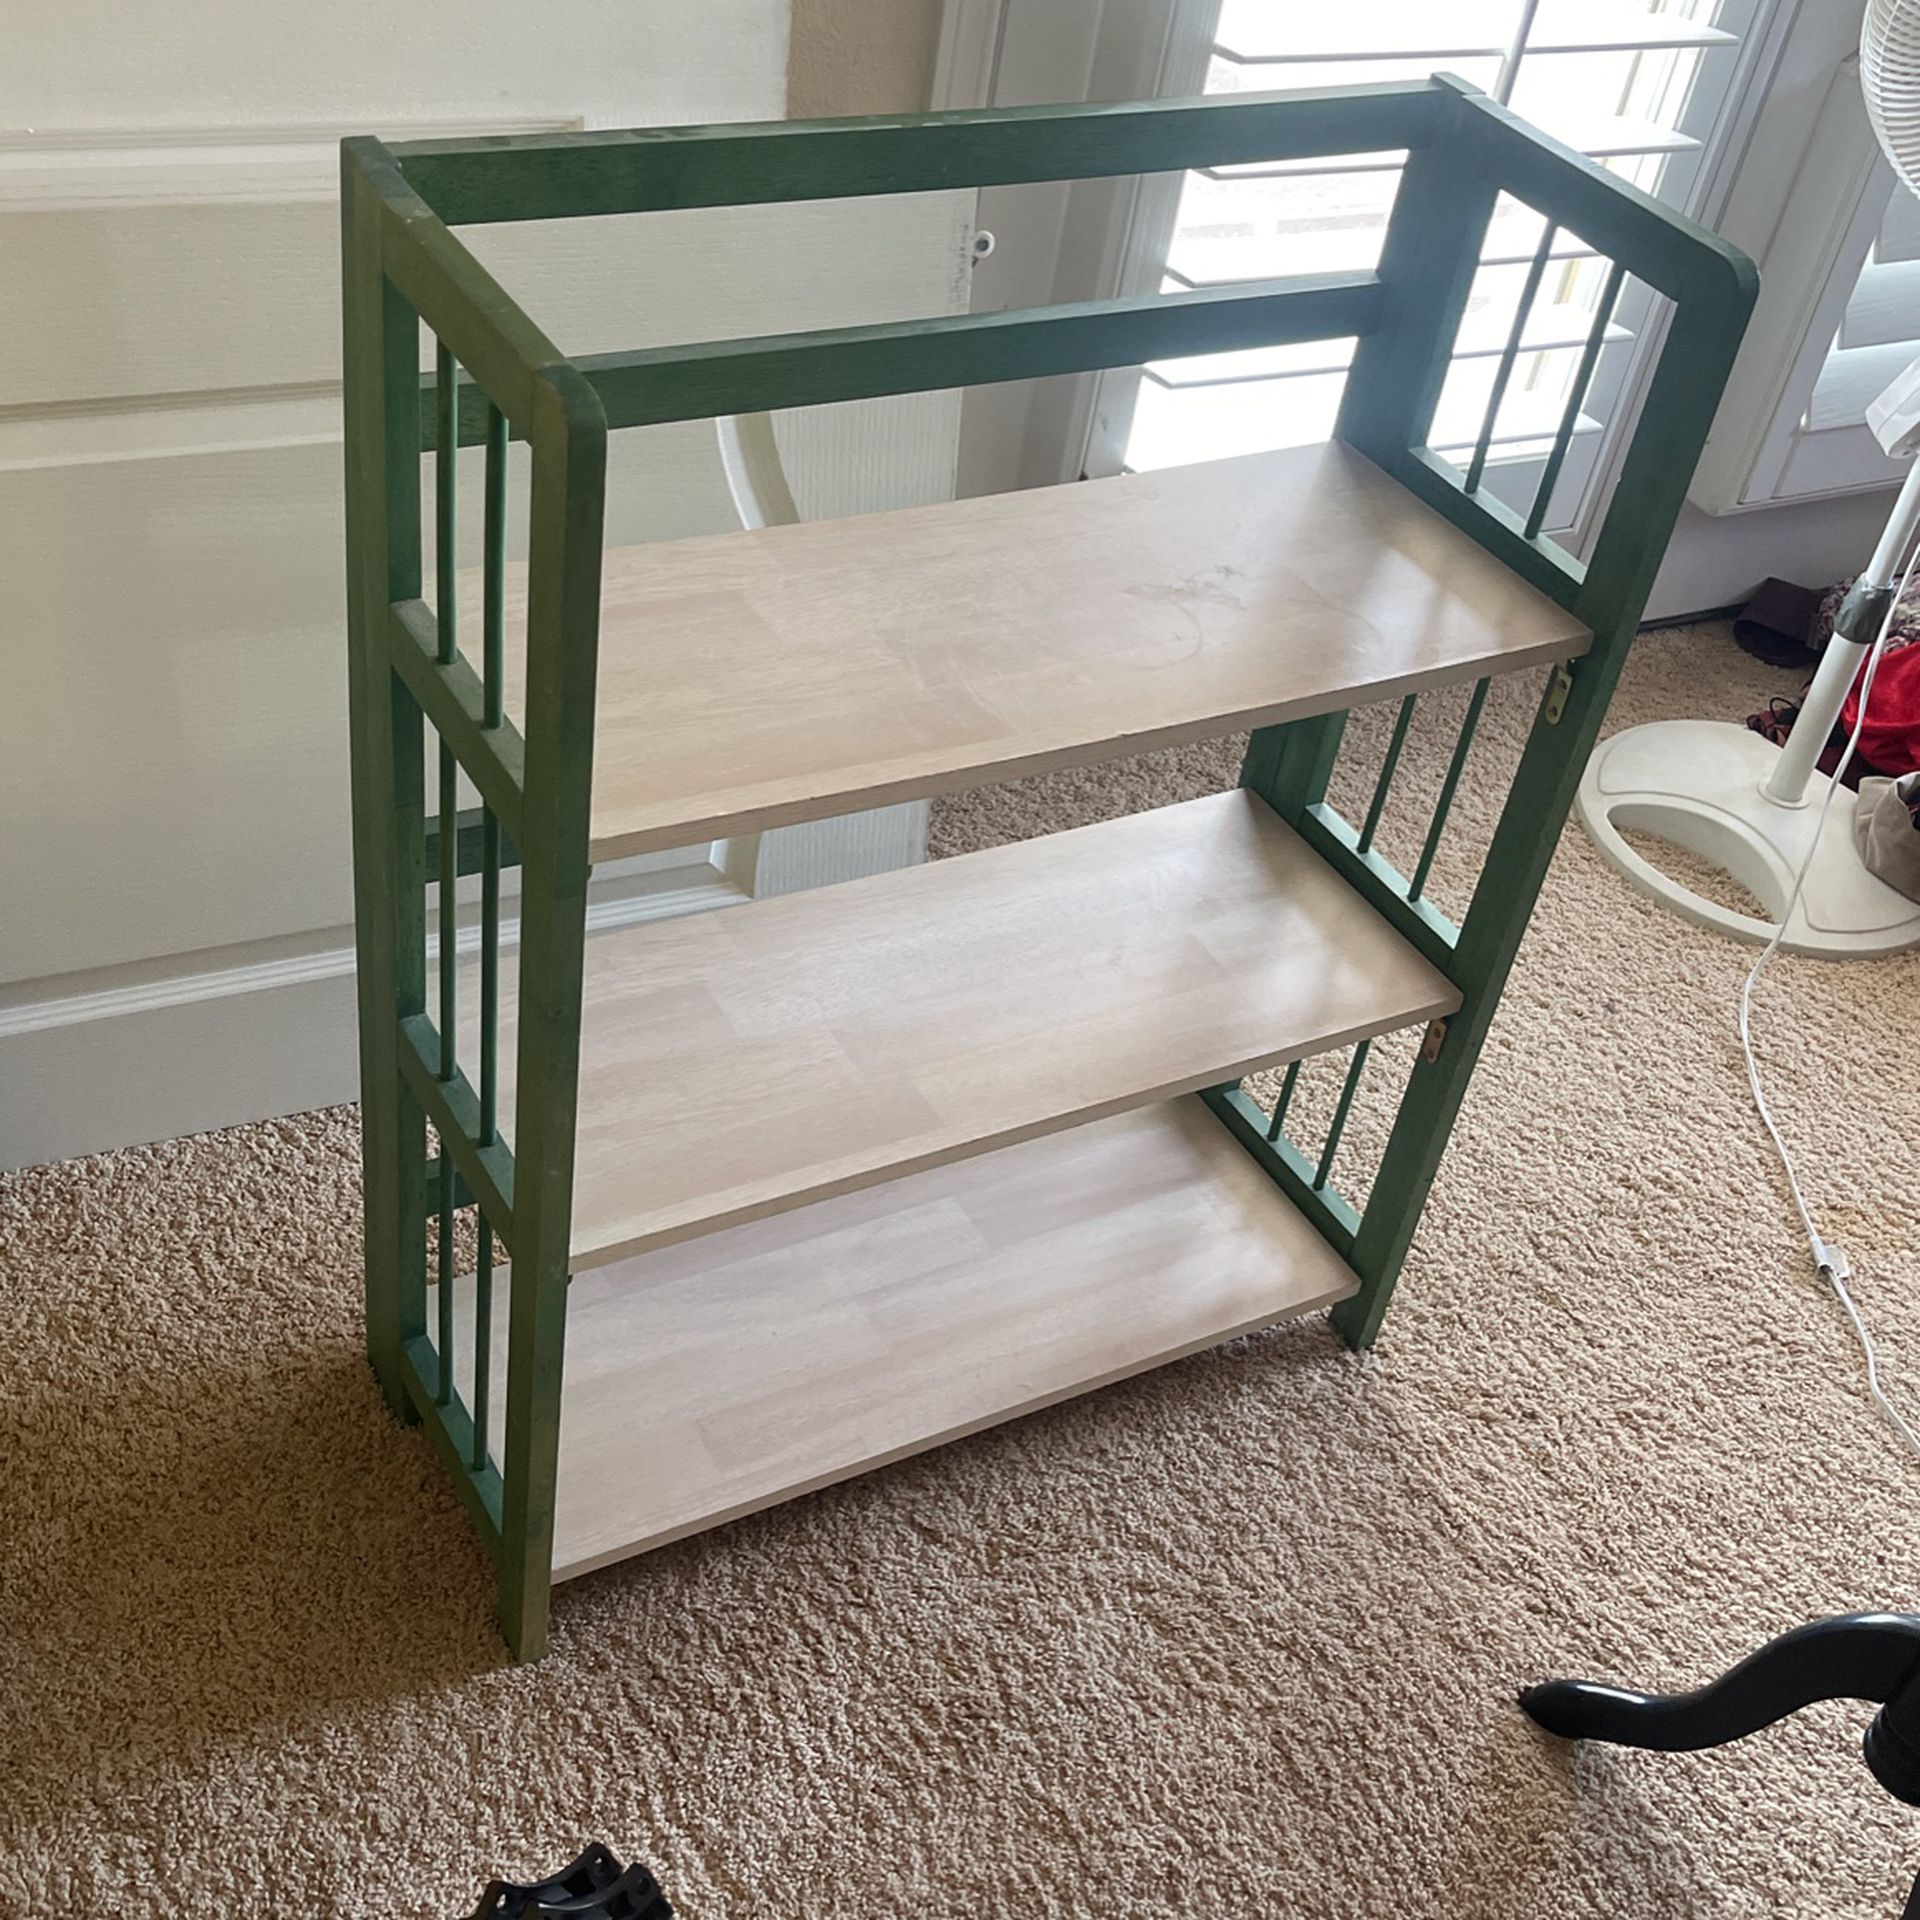 Green And White Wooden Shelf